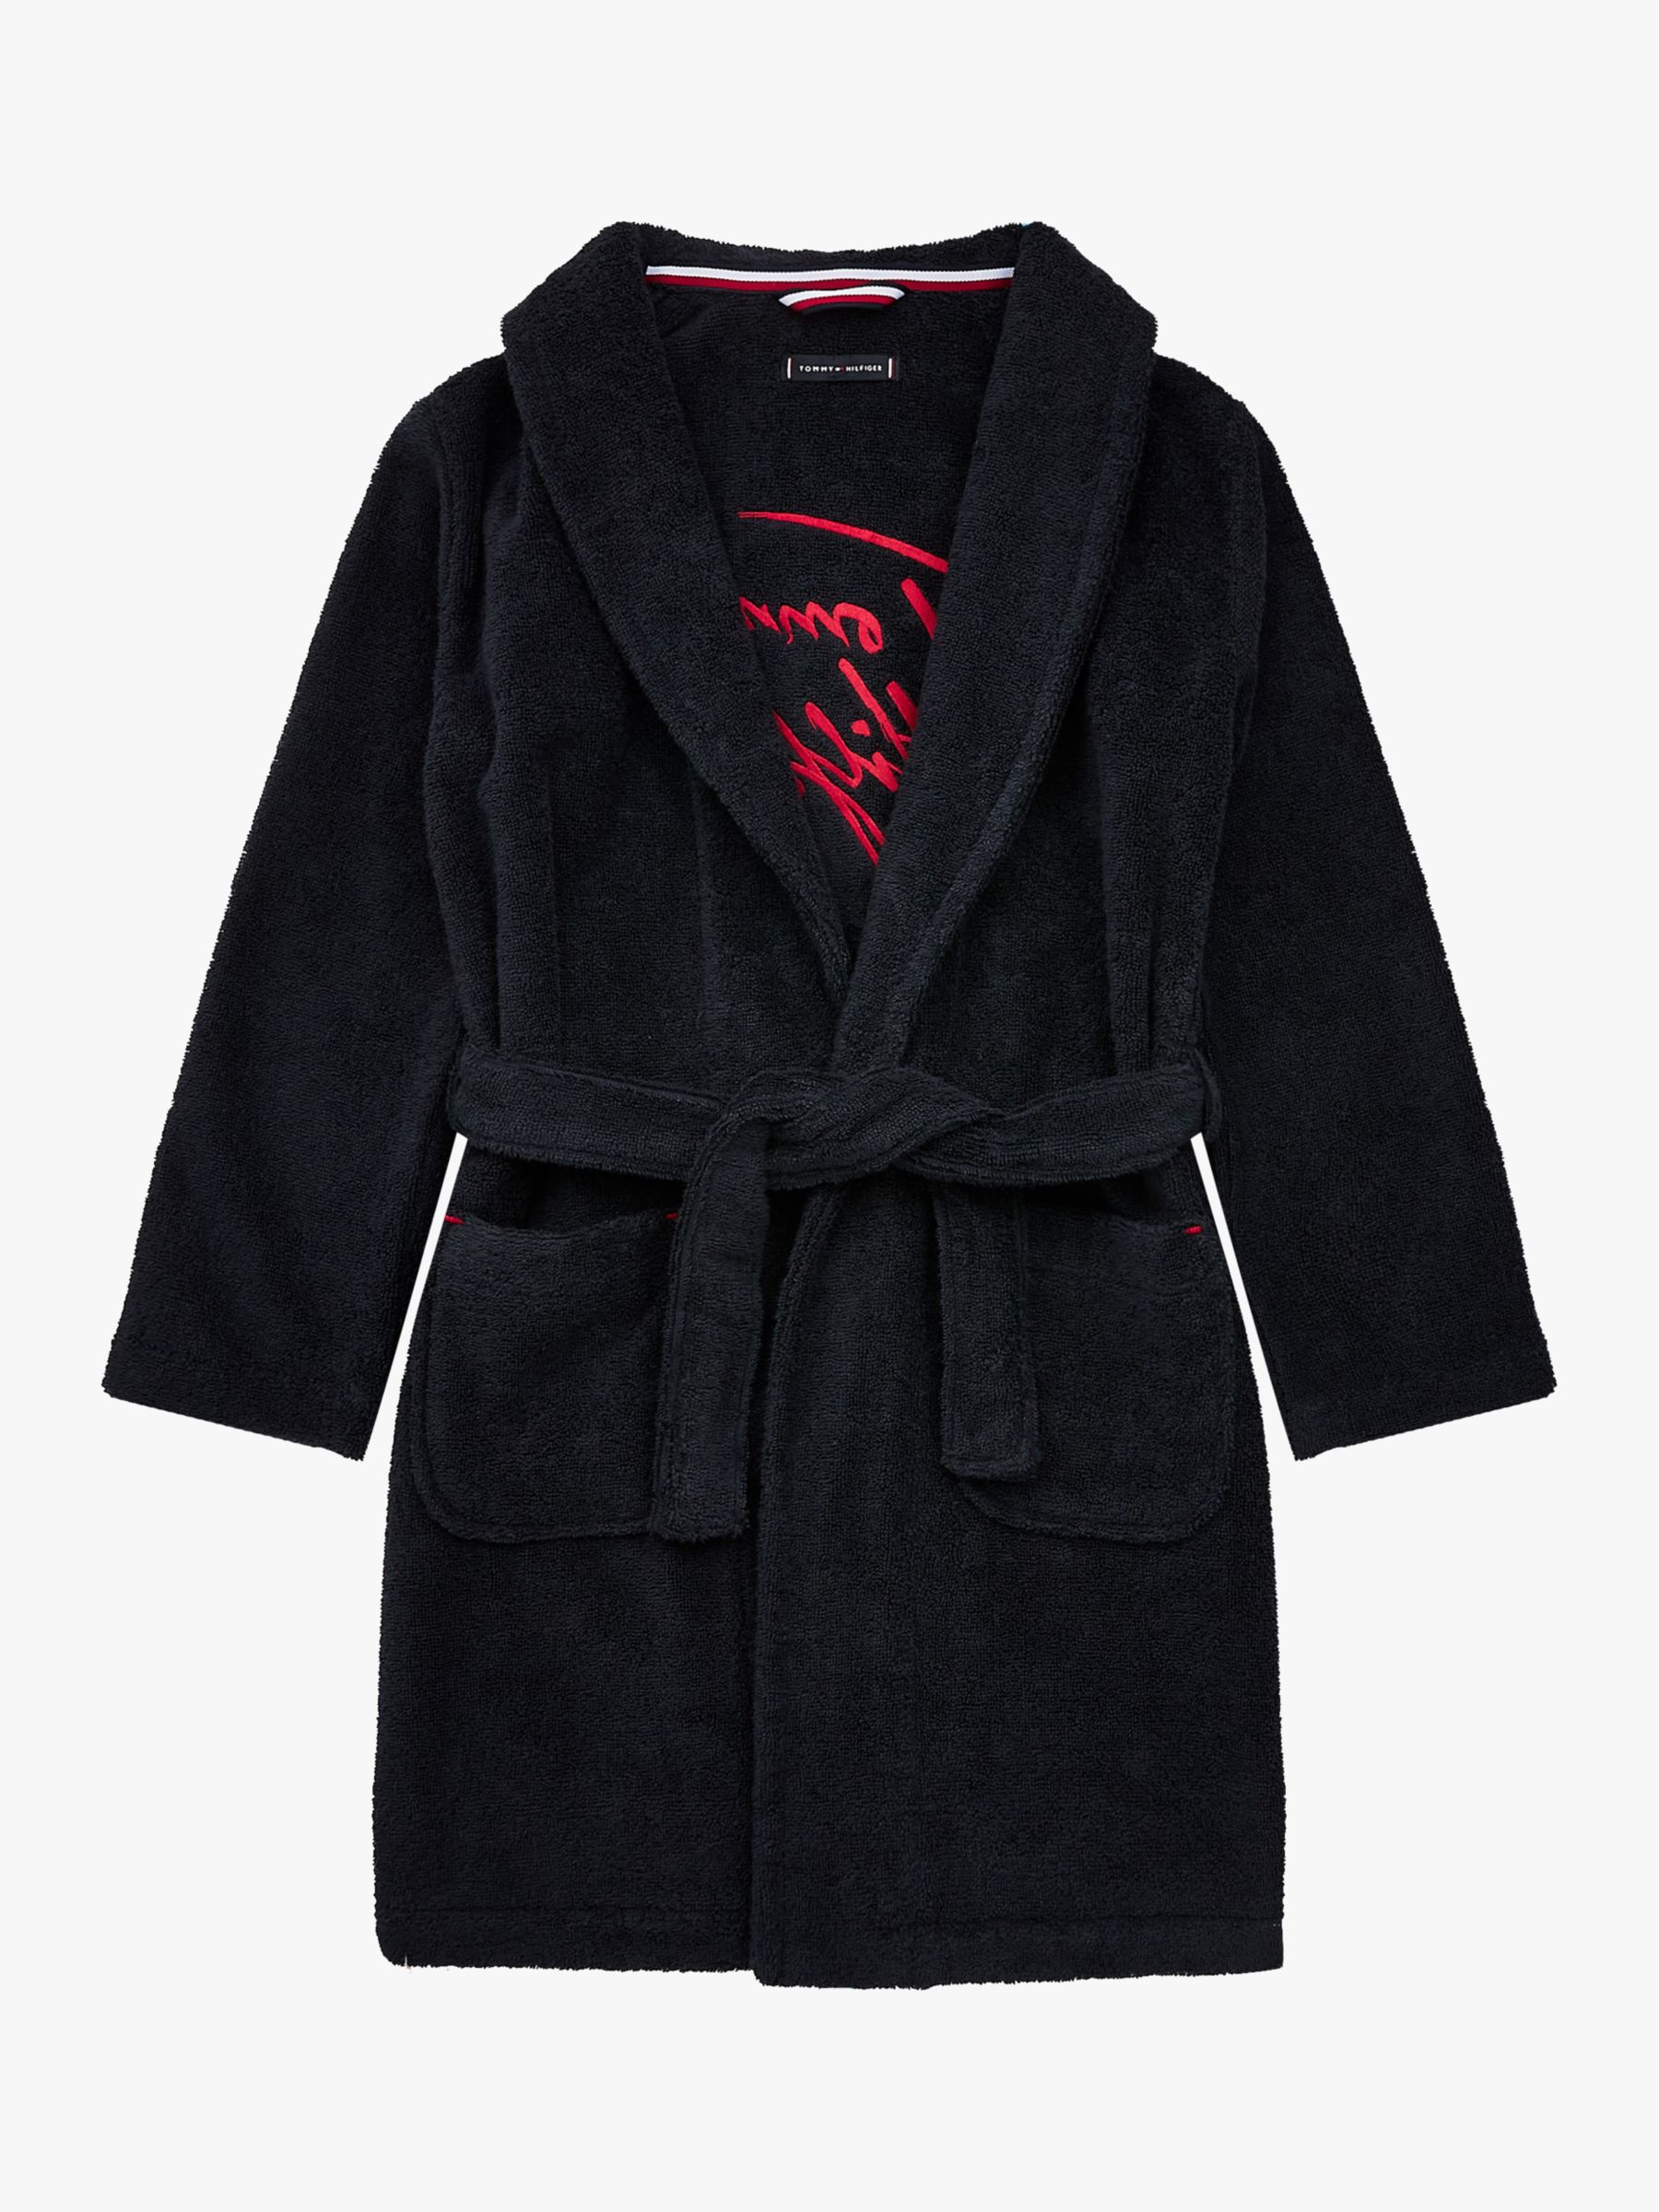 Tommy Hilfiger Kids' Tommy 85 Robe at John Lewis & Partners